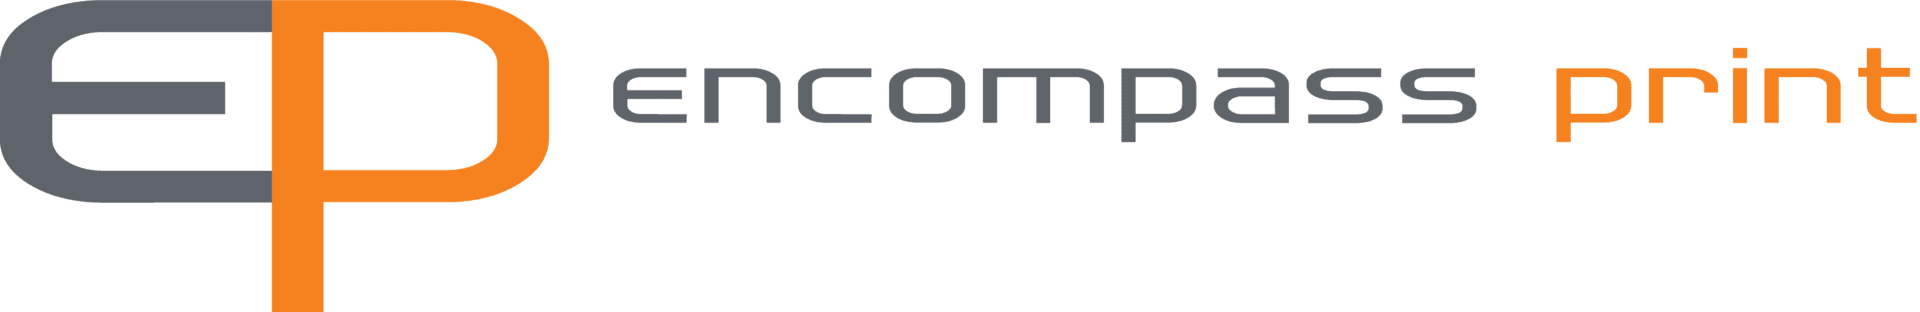 A logo of the company comnet